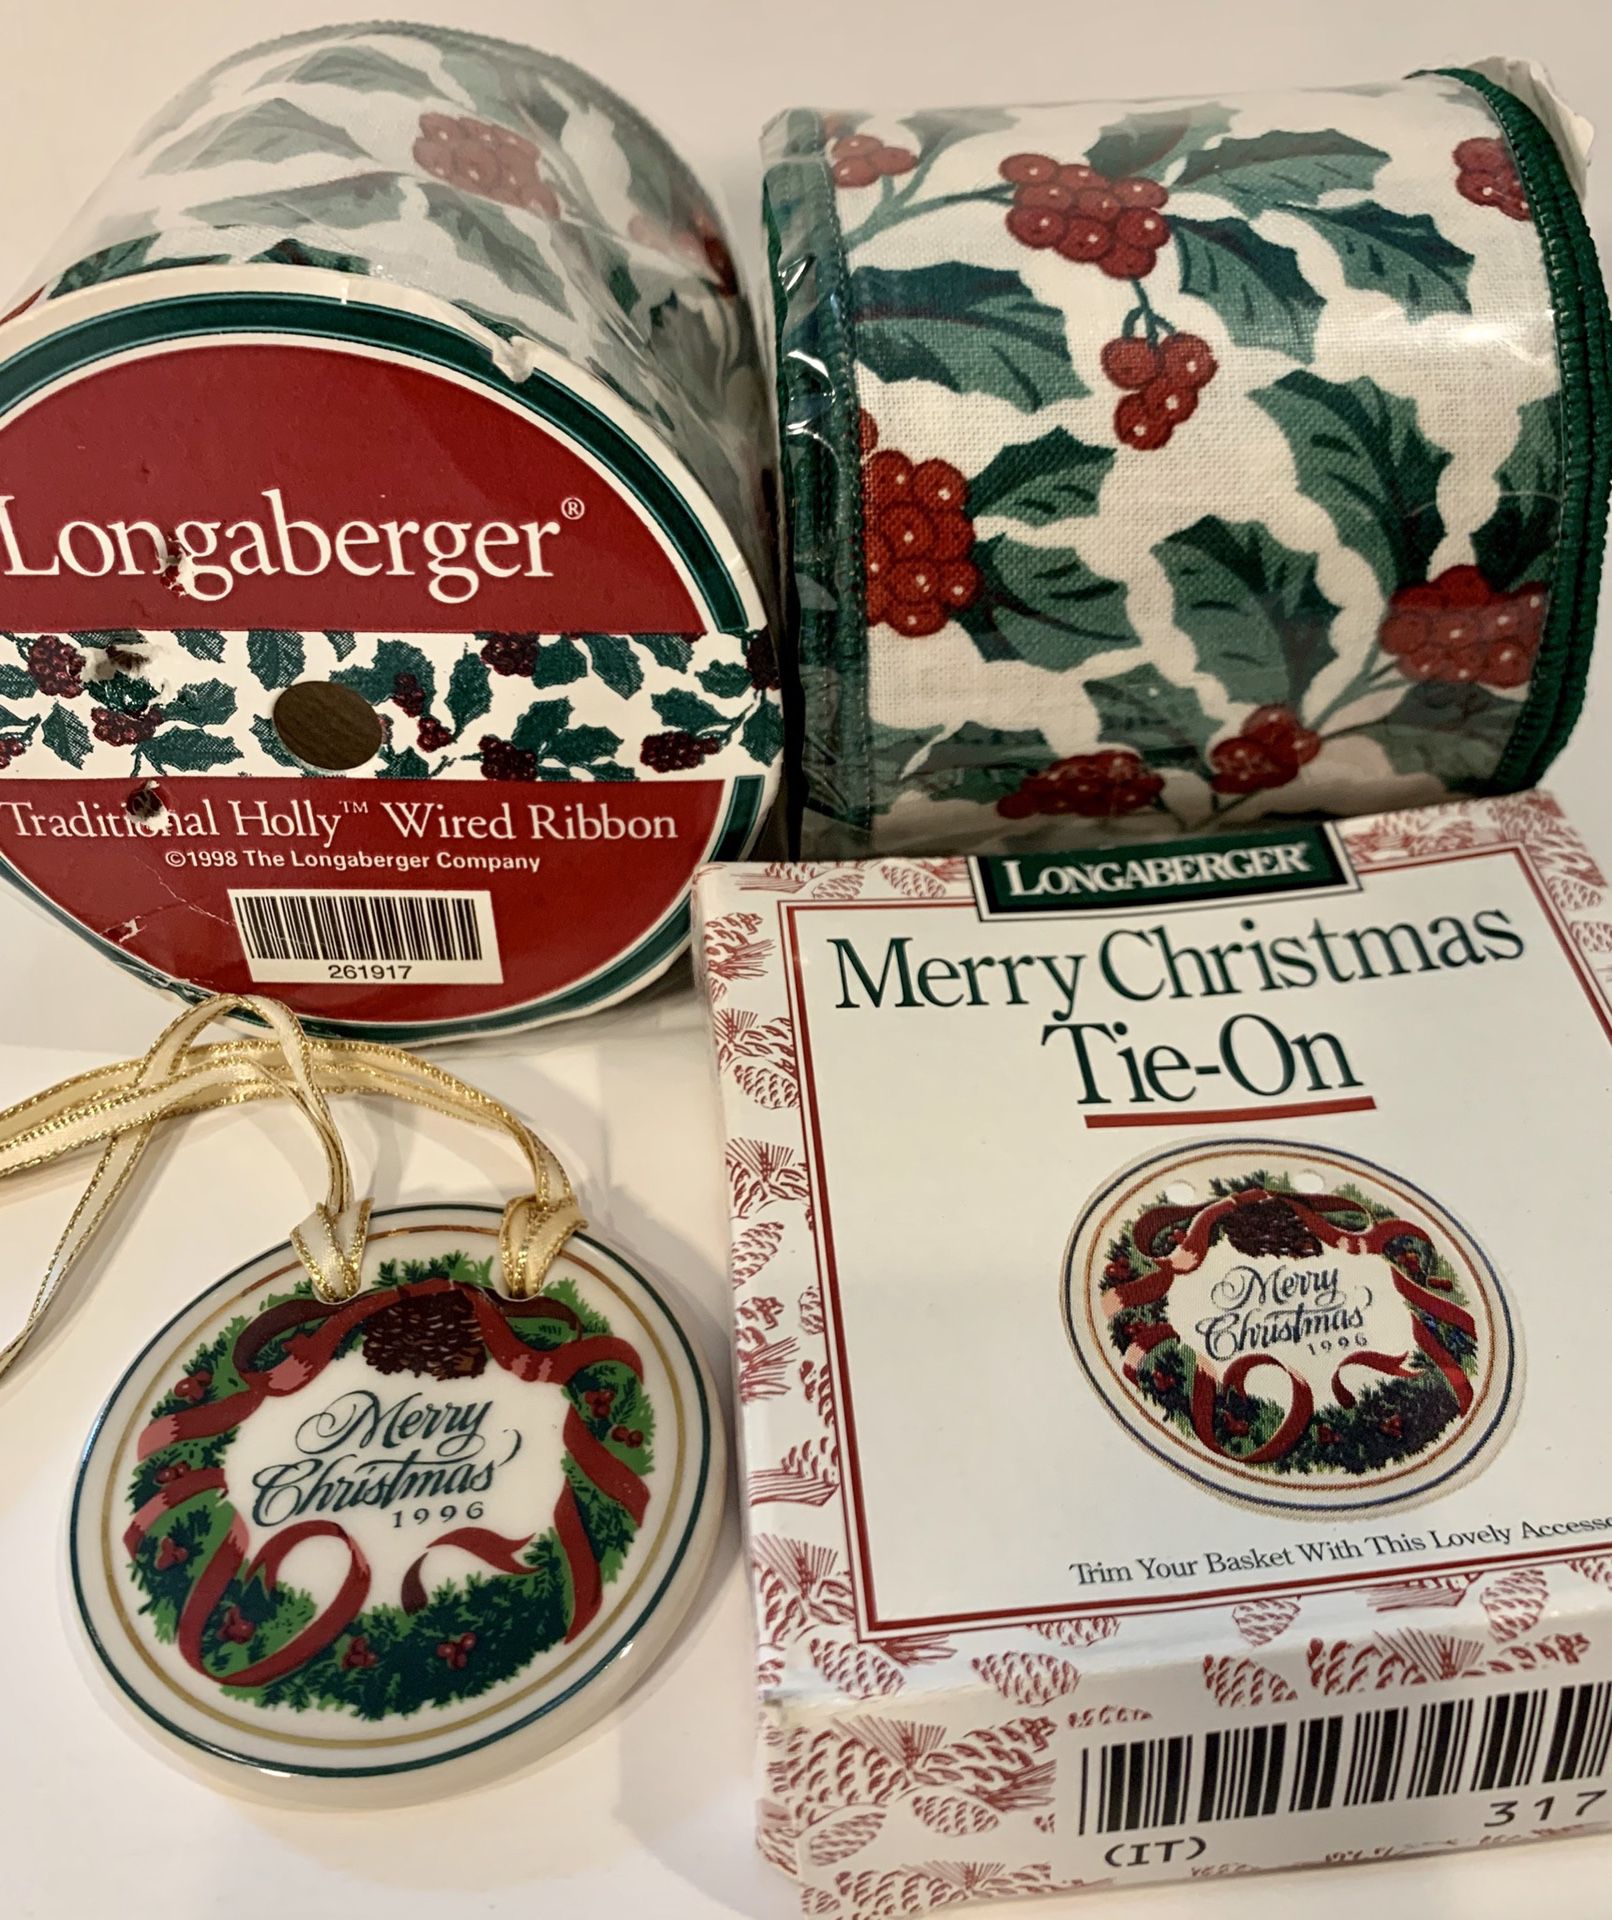 New Old Stock Longaberger Holy Xmas Wired Ribbon & Tie-on